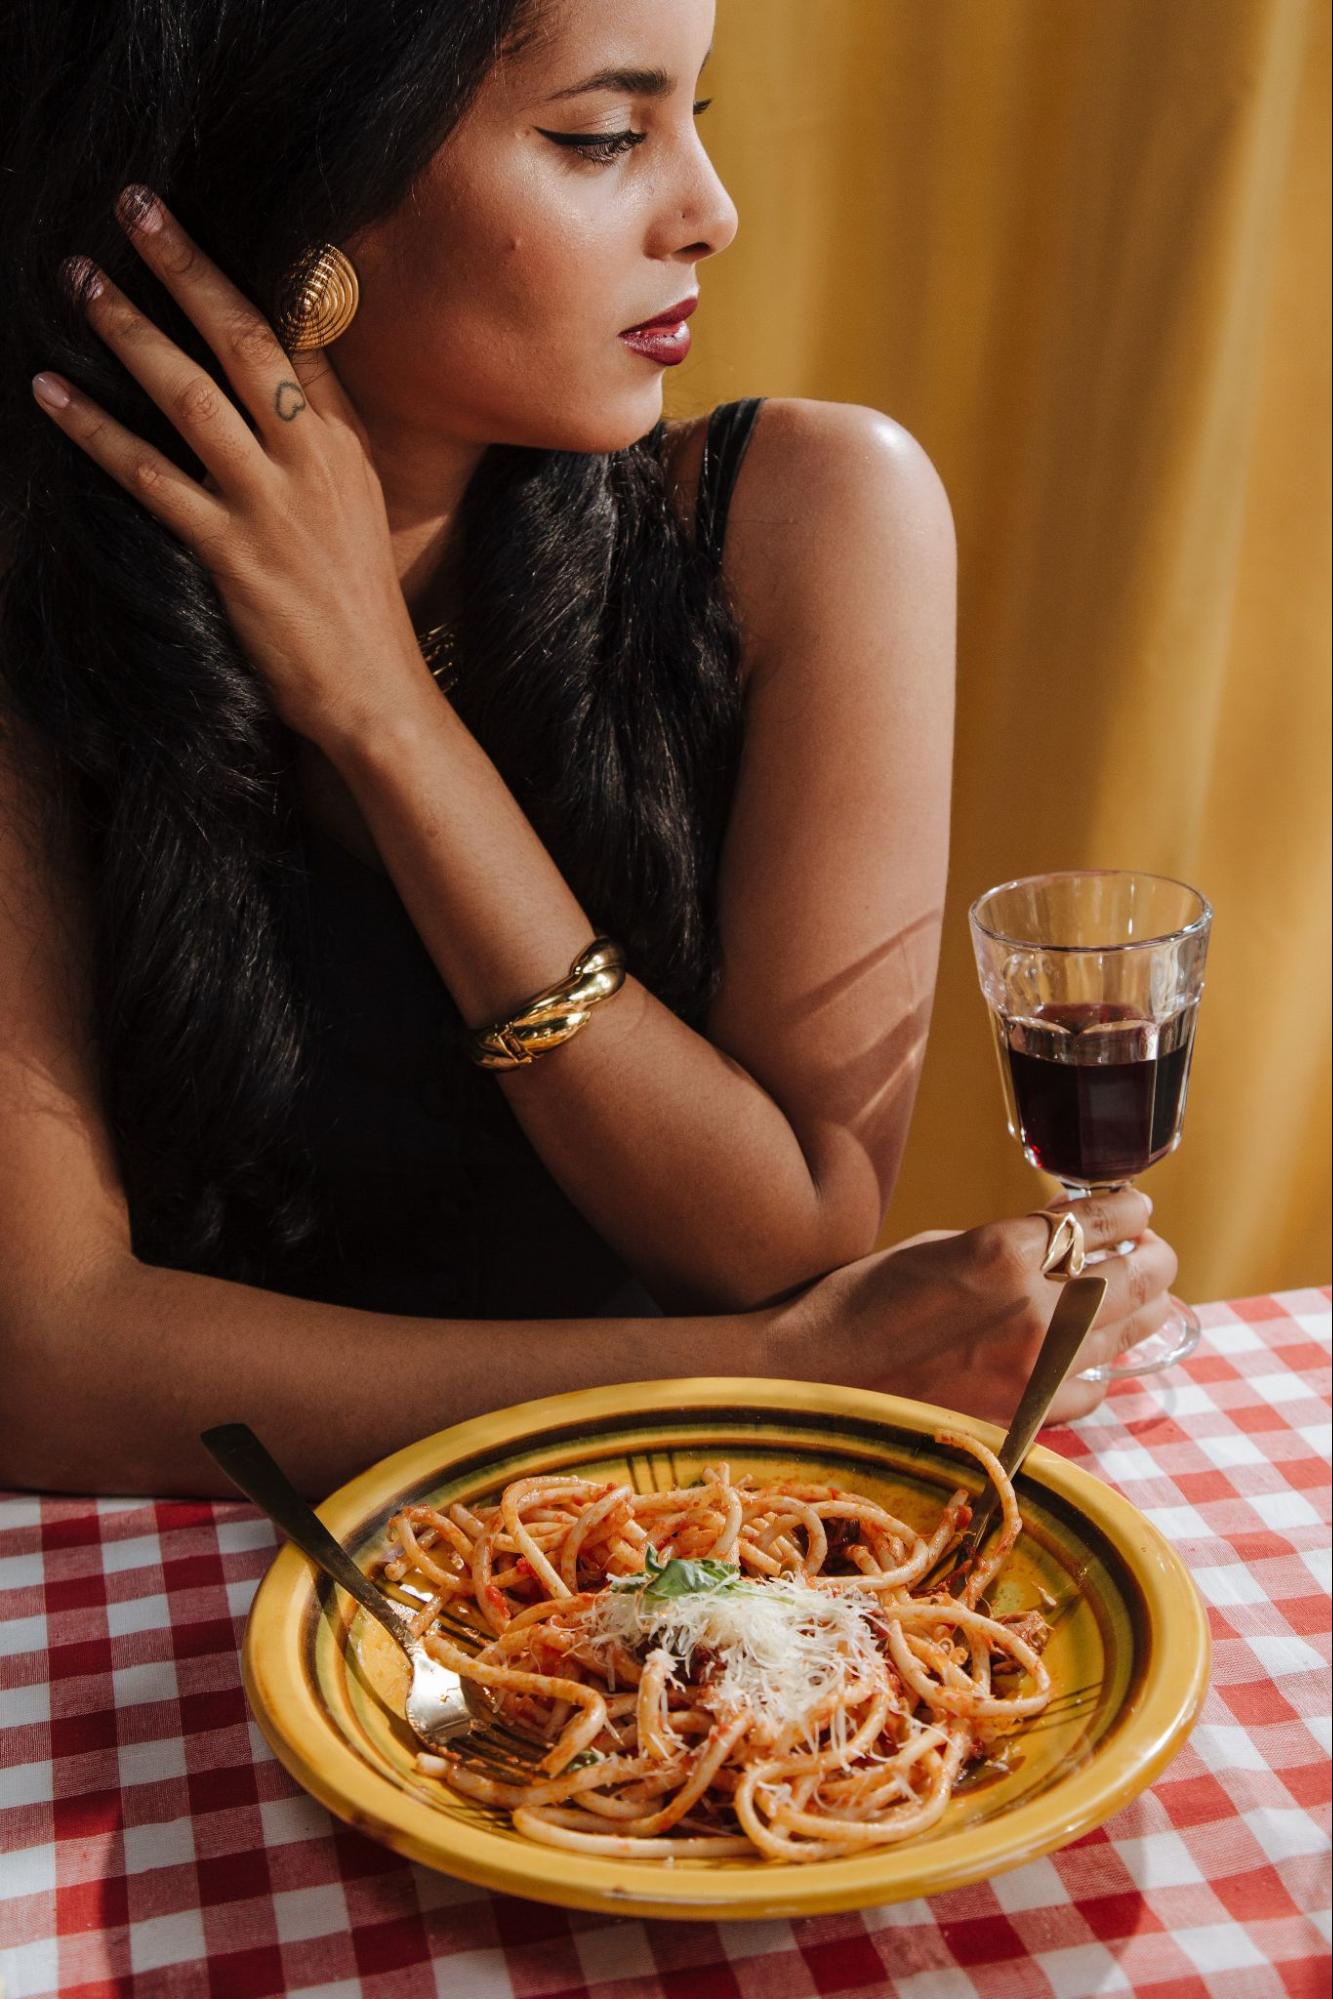 Woman behind her plate of pasta holding a glass of red wine